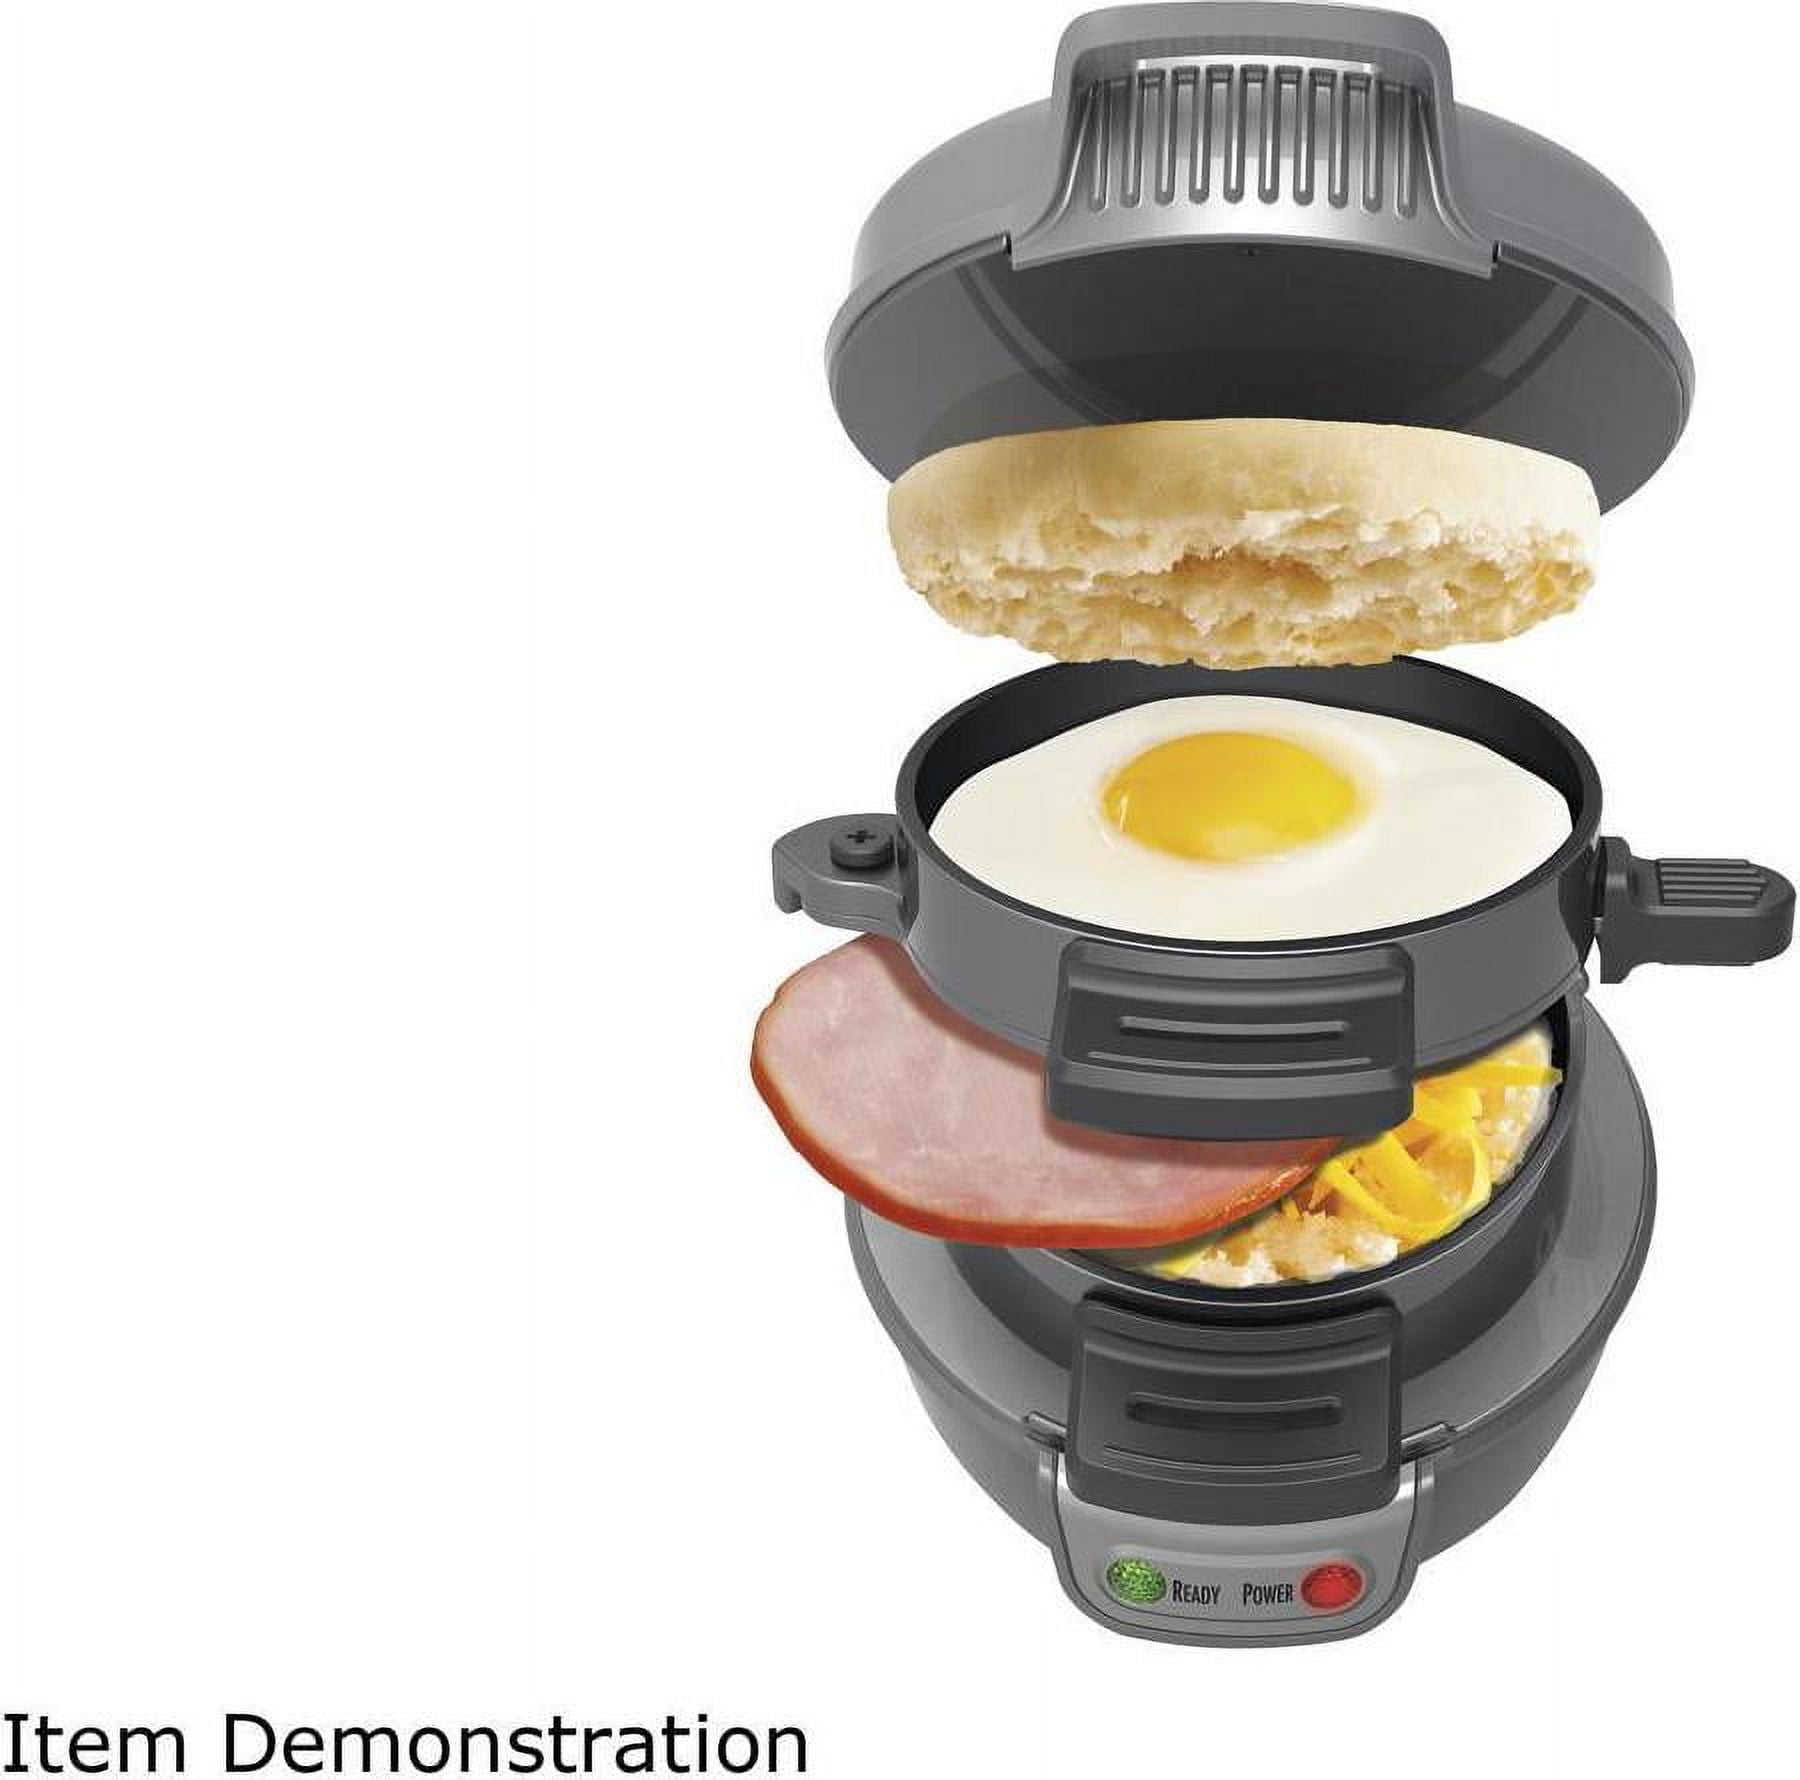 Review: I Tried the Hamilton Beach Breakfast Sandwich Maker — Here's How It  Works